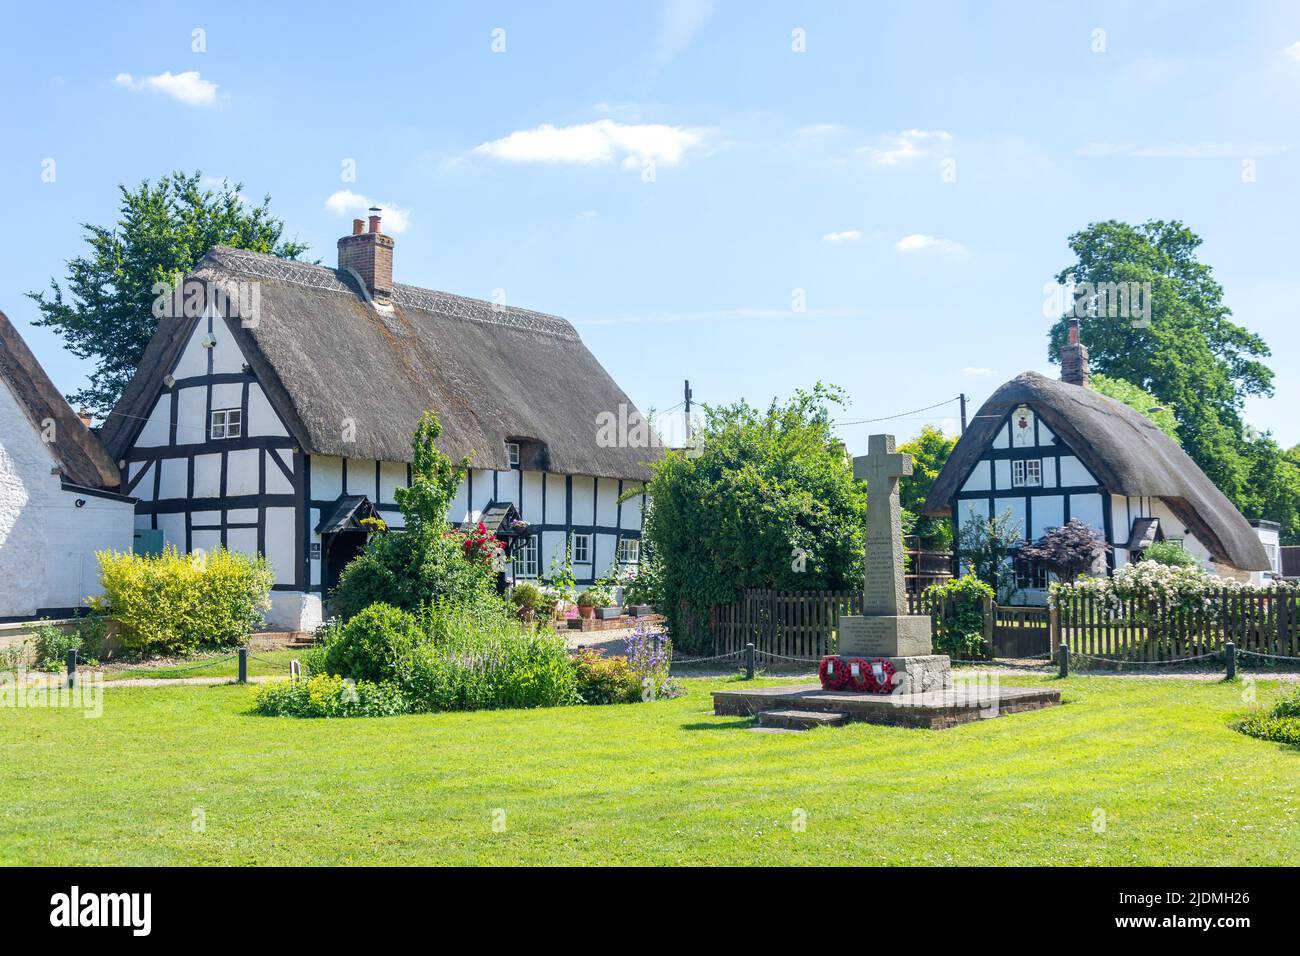 Thatched cottages on The Green, High Street, Chalgrove, Oxfordshire, England, United Kingdom Stock Photo